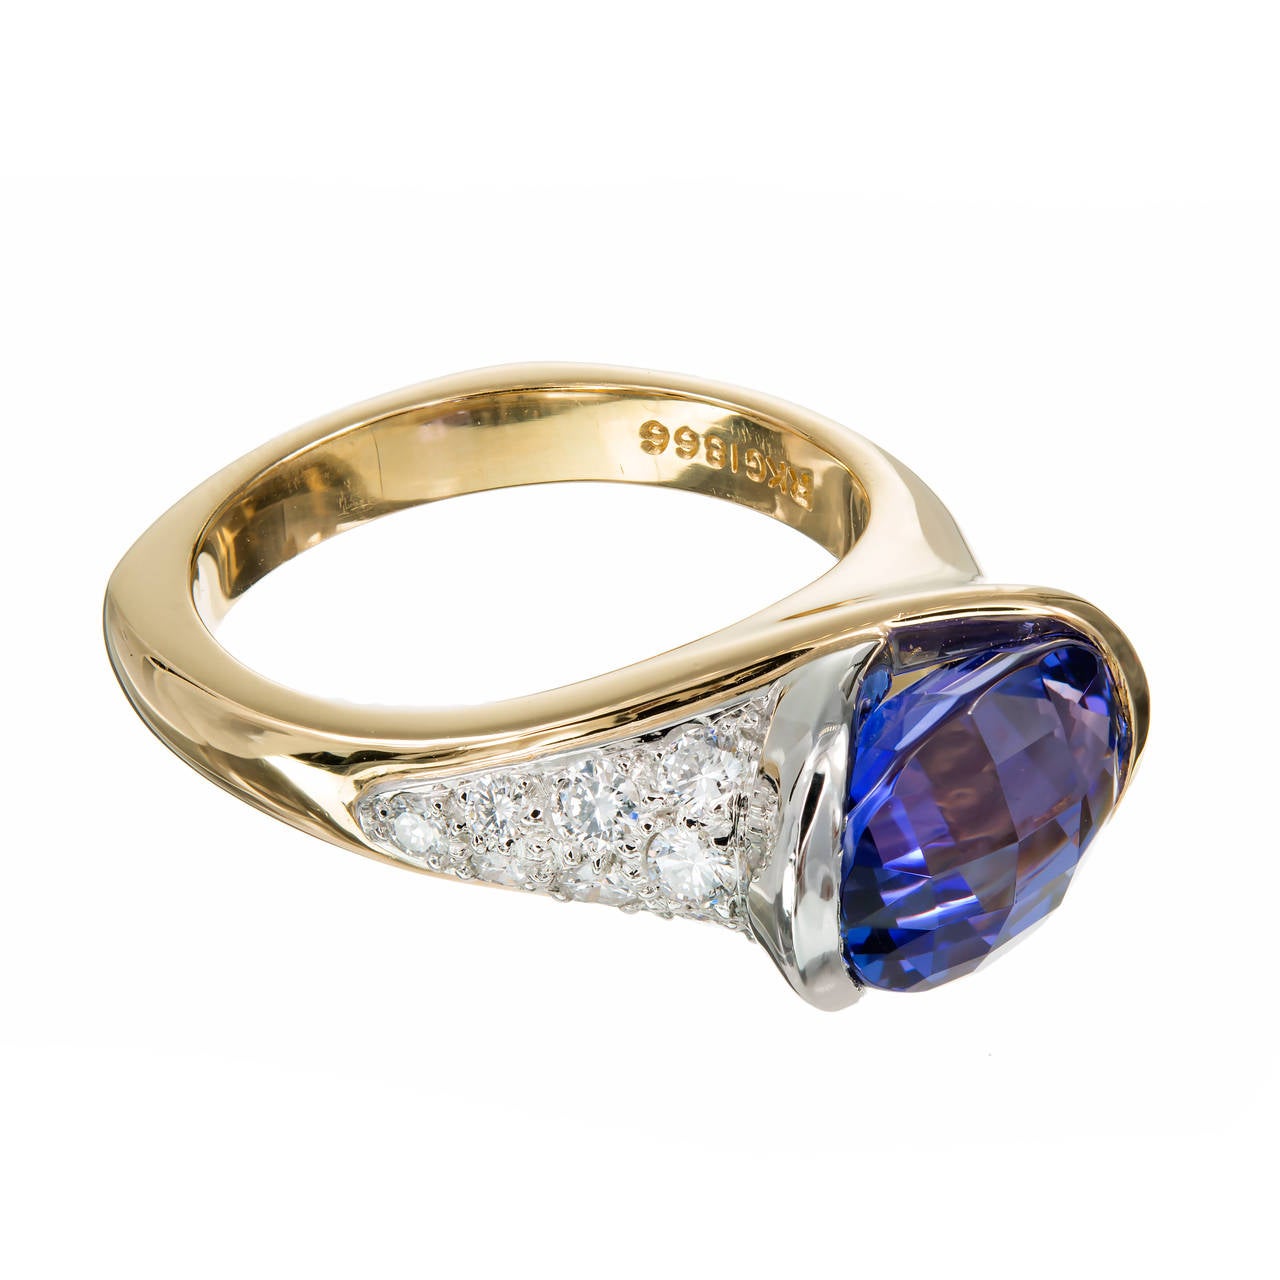 Rare Richard Krementz top fine custom cut gem Tanzanite 4.26ct 18k yellow gold Platinum ring with fine full cut diamonds. Super bright oval faceted top Tanzanite. Before they closed Richard Krementz was known for cutting and setting some of the